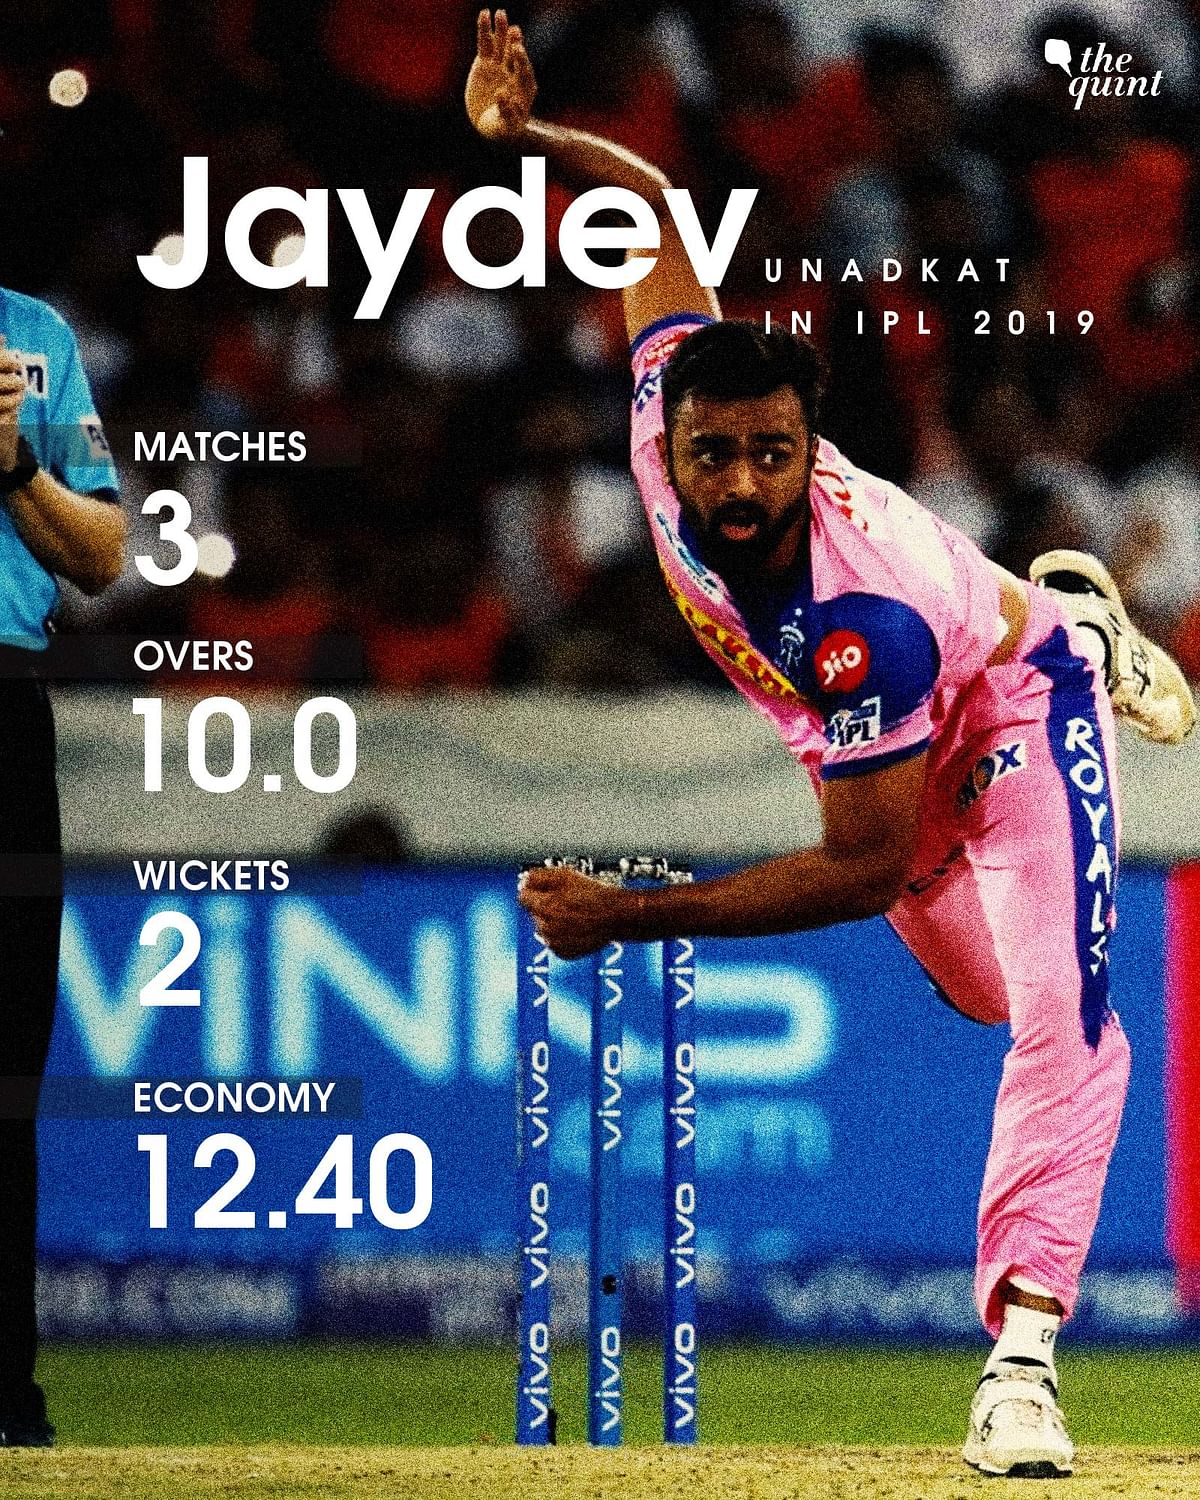 Here’s a look at the four most expensive bowlers in the current edition of the IPL.